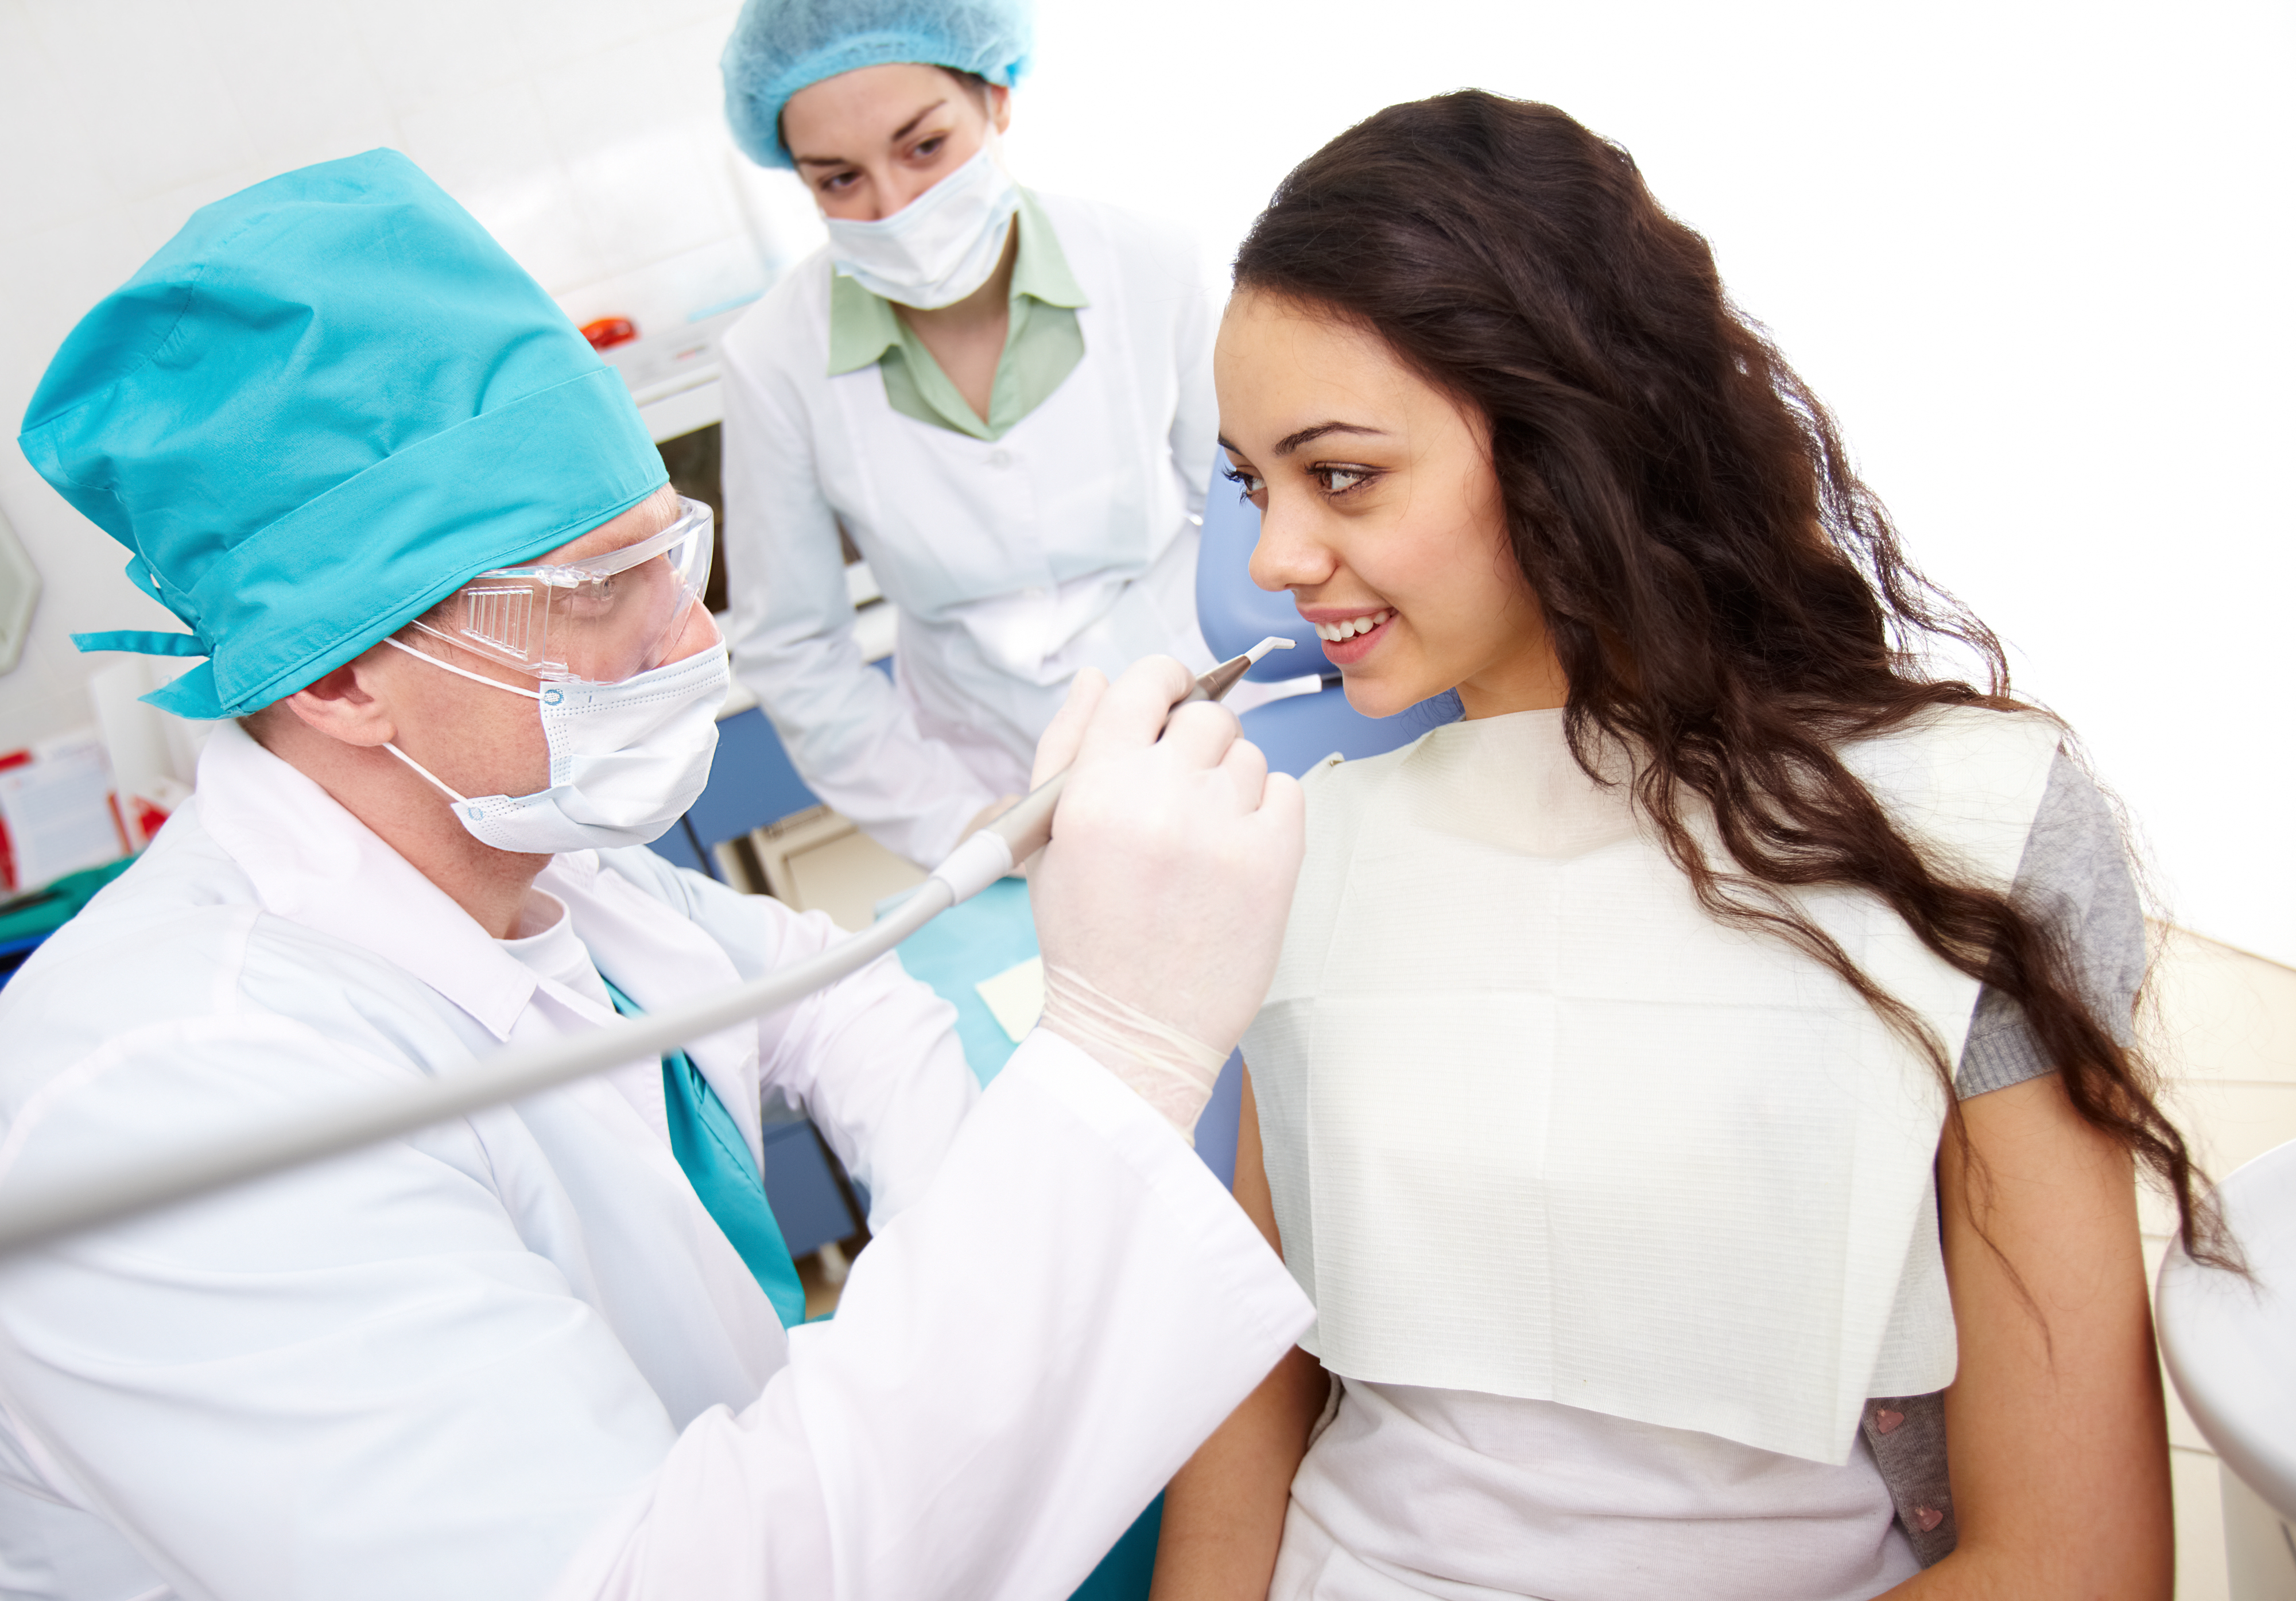 What Is An Endodontic Specialist? A Root Canal Specialist